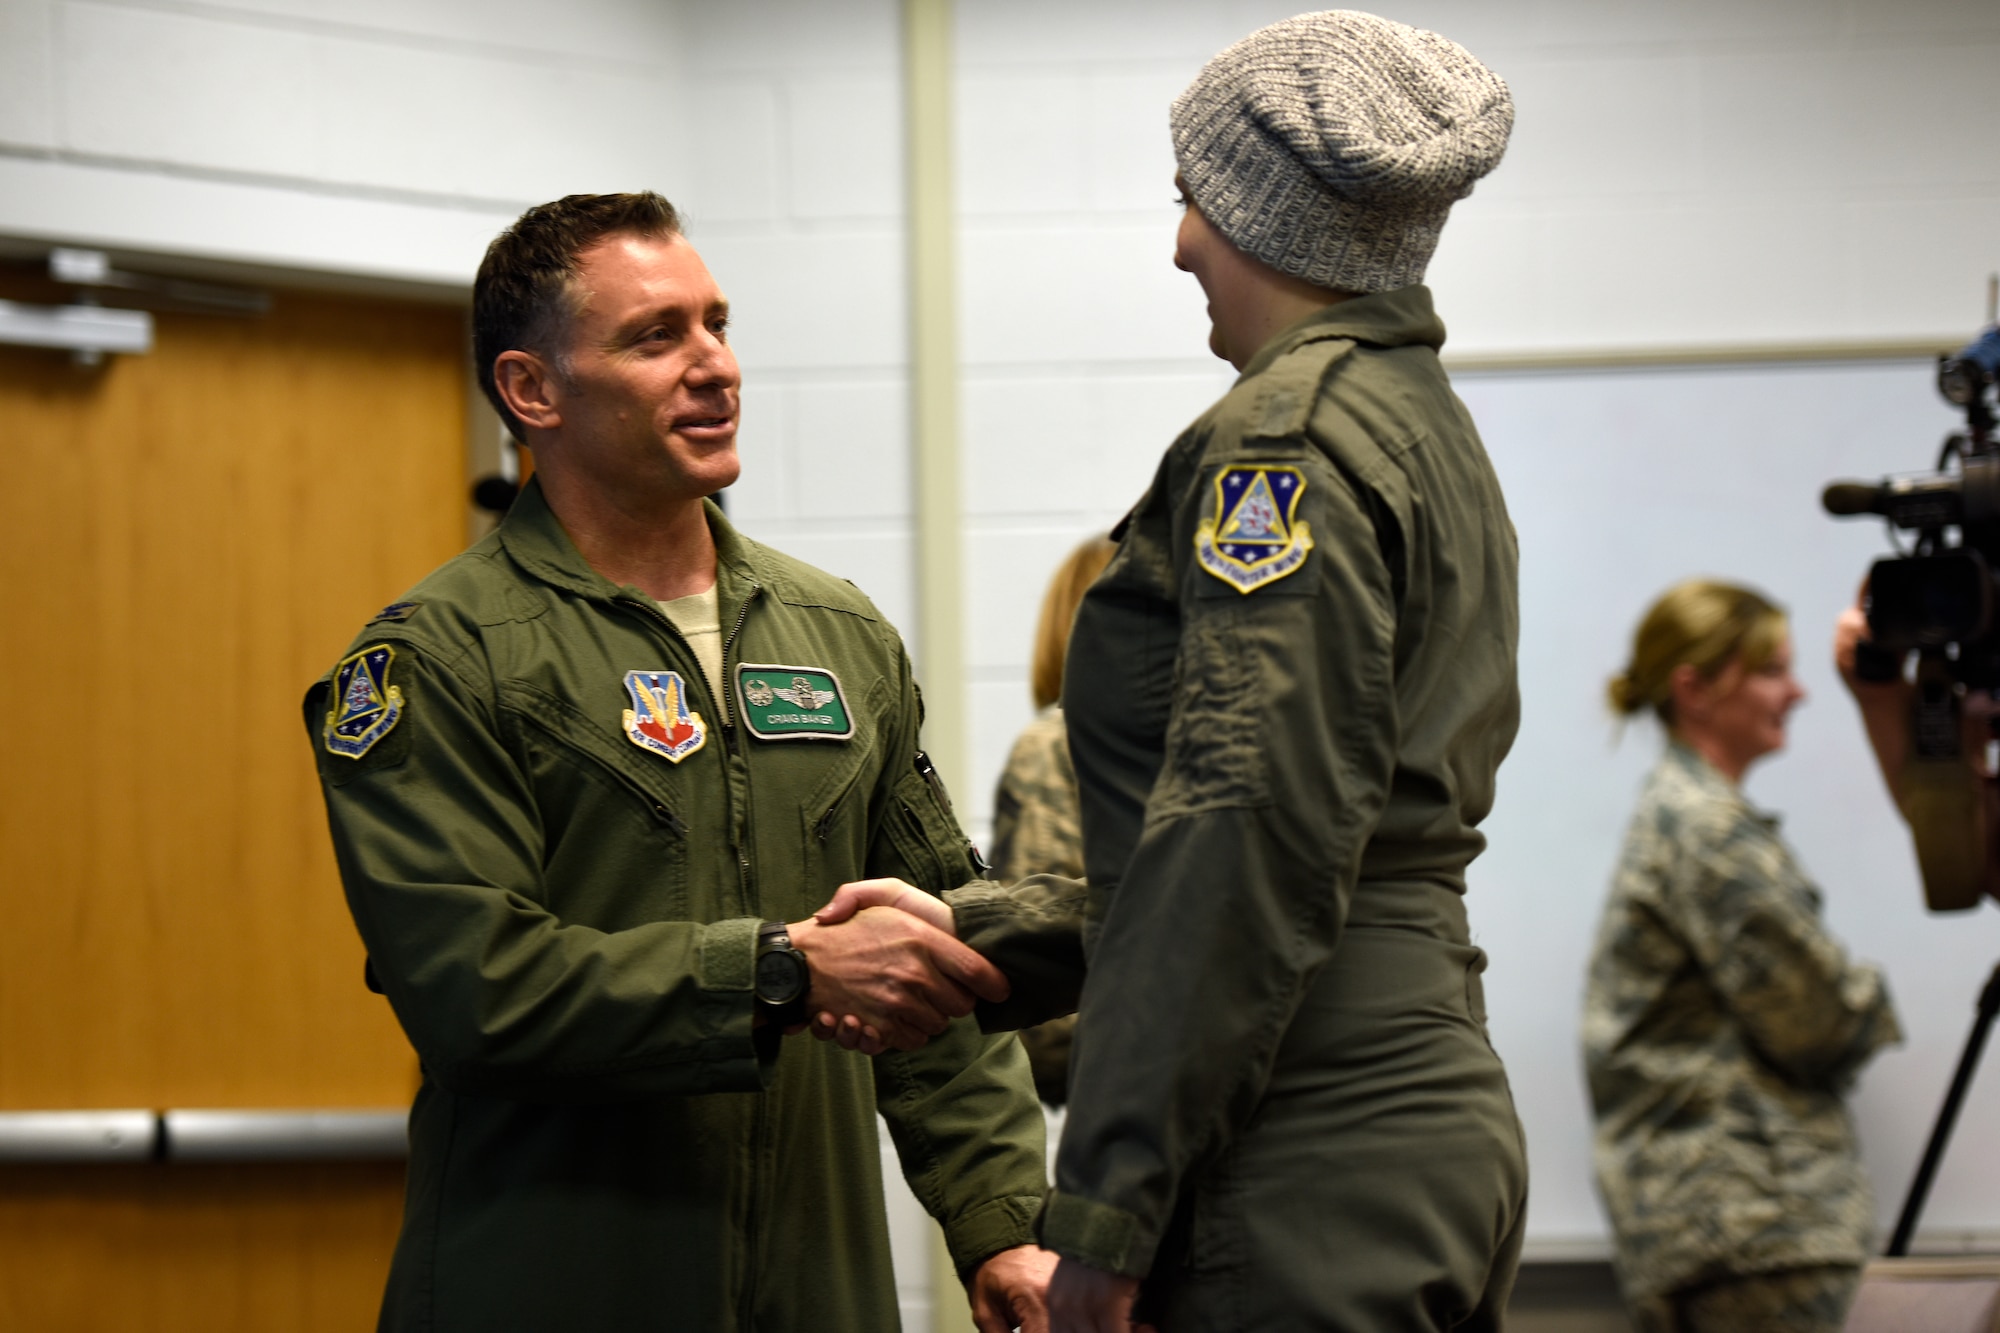 U.S. Air Force Col. Craig R. Baker, the 180th Fighter Wing Commander, congratulates honorary 2nd Lt. Ashleigh Hunt after her commissioning ceremony May 26, 2016, at the 180FW in Swanton, Ohio. Hunt, who was diagnosed with osteosarcoma at 19, was honored during the first-ever Pilot for a Day event at the 180FW where she launched an F-16 Fighting Falcon, received a tour of the base facilities, and experienced basic pilot survival and parachute training. (U.S. Air National Guard photo by Staff Sgt. Shane Hughes)